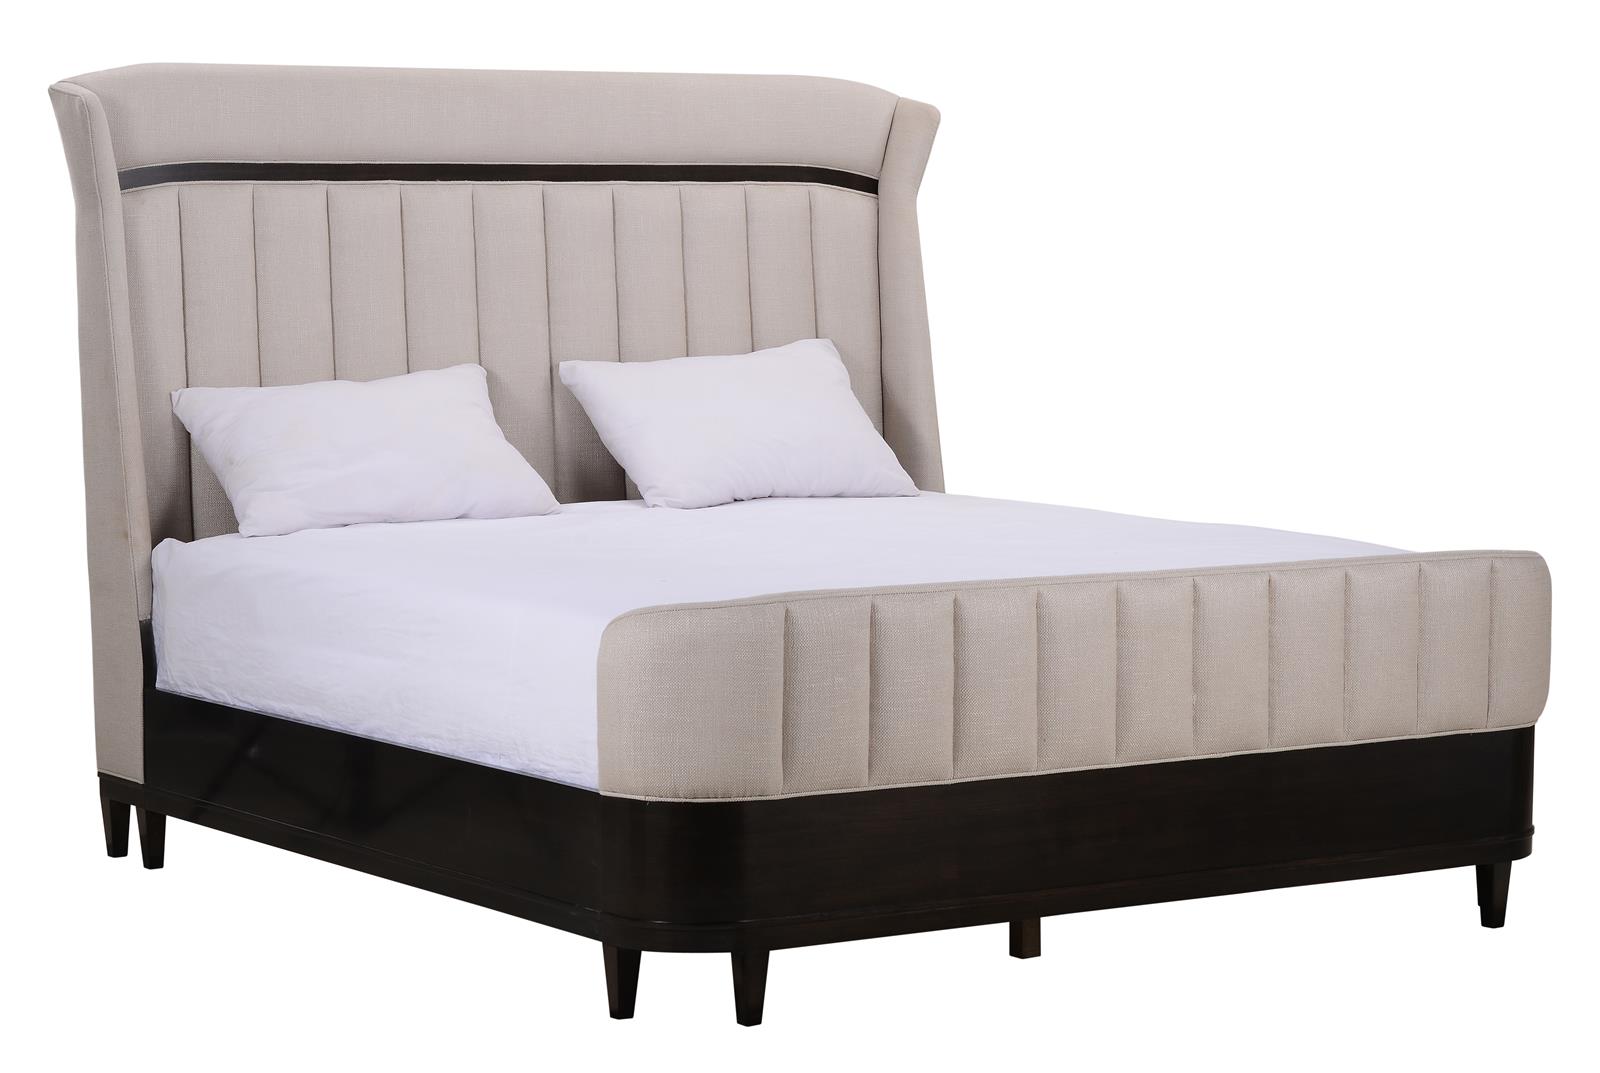 PROSSIMO - LETTO 6/6 UPH SHELTER BED